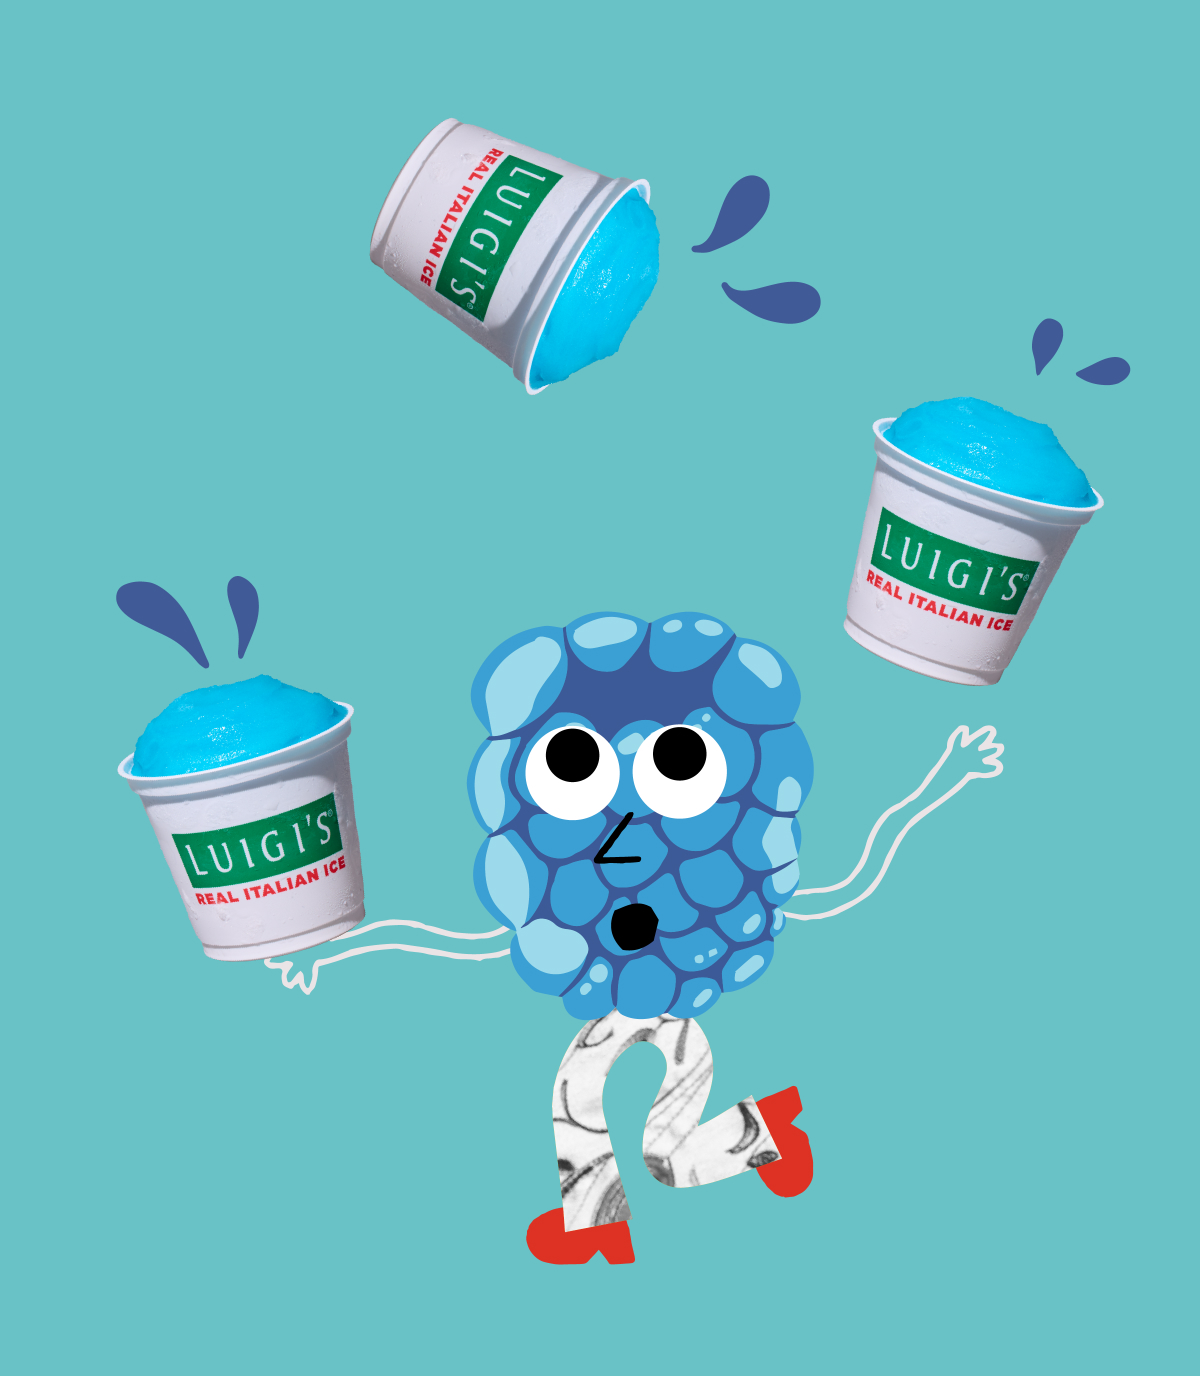 Blue raspberry graphic character is juggling three cups of blue raspberry. LUIGI'S Real Italian Ice. Background is light blue.